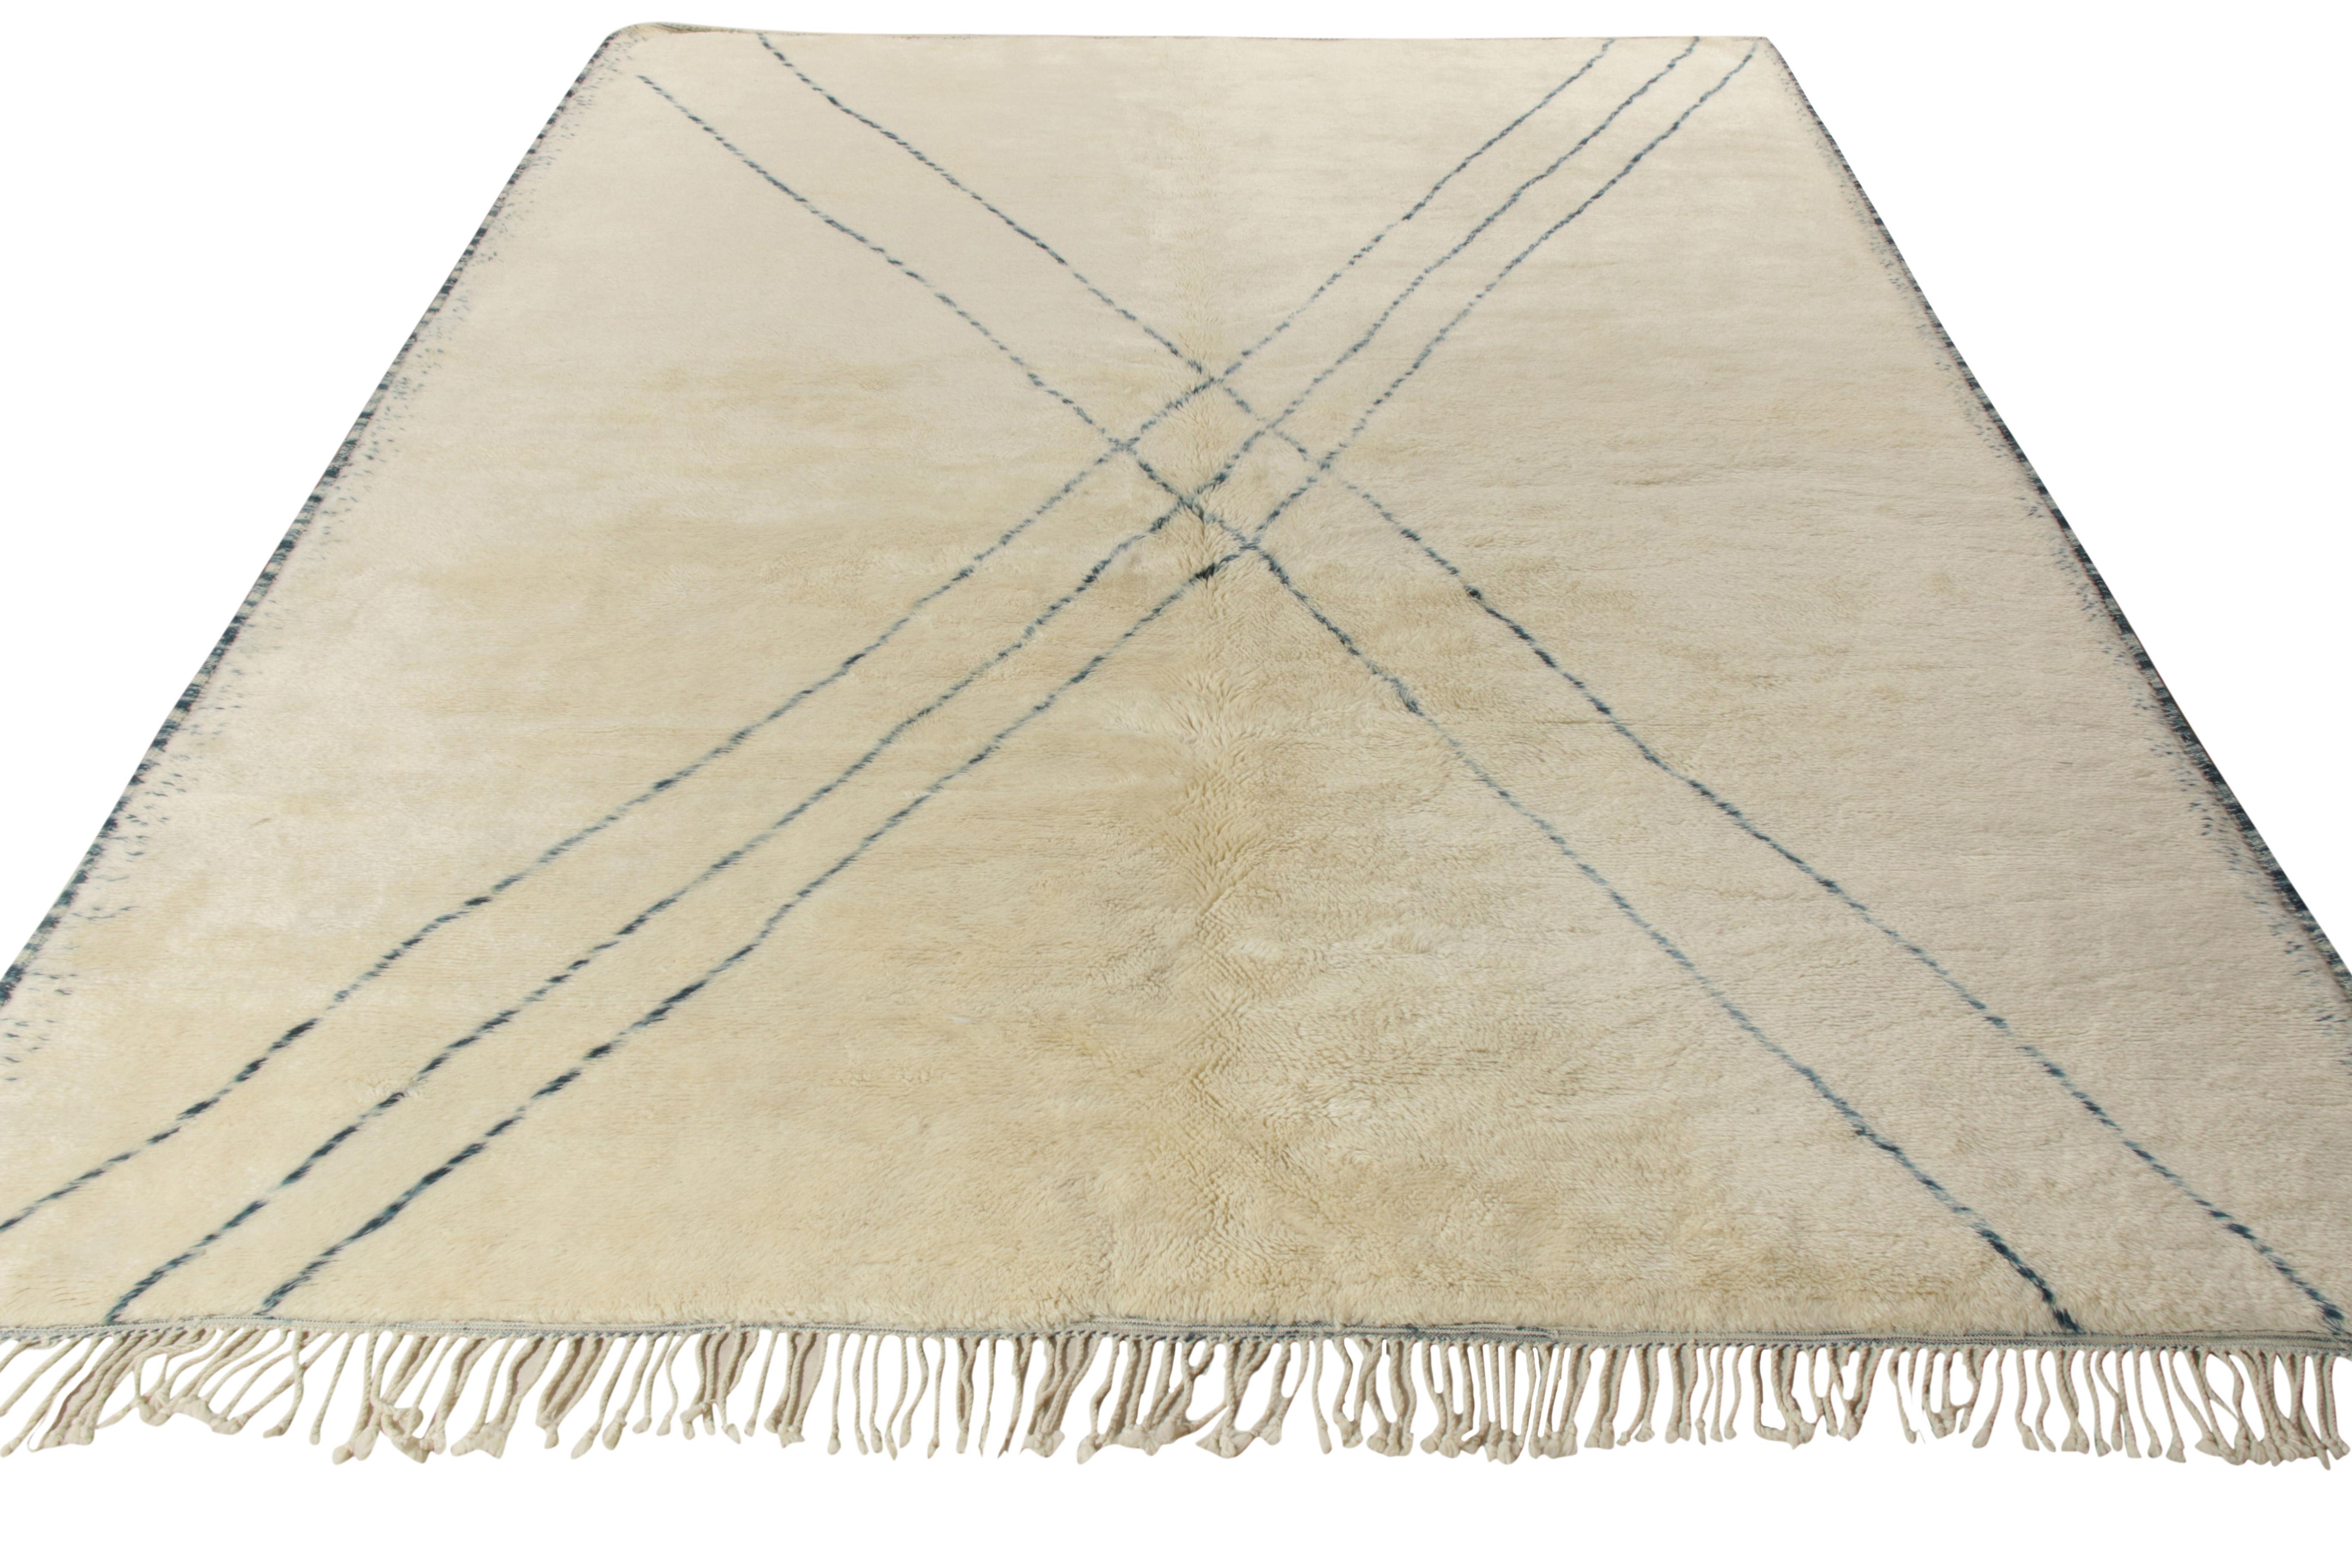 Hand knotted in luxe quality yarn, this 10x13 piece hails from contemporary additions to Rug & Kilim’s Moroccan rug collection. While the field flourishes in the exuberance of a creamy beige-white colourway, the rug enjoys a sophisticated look in a